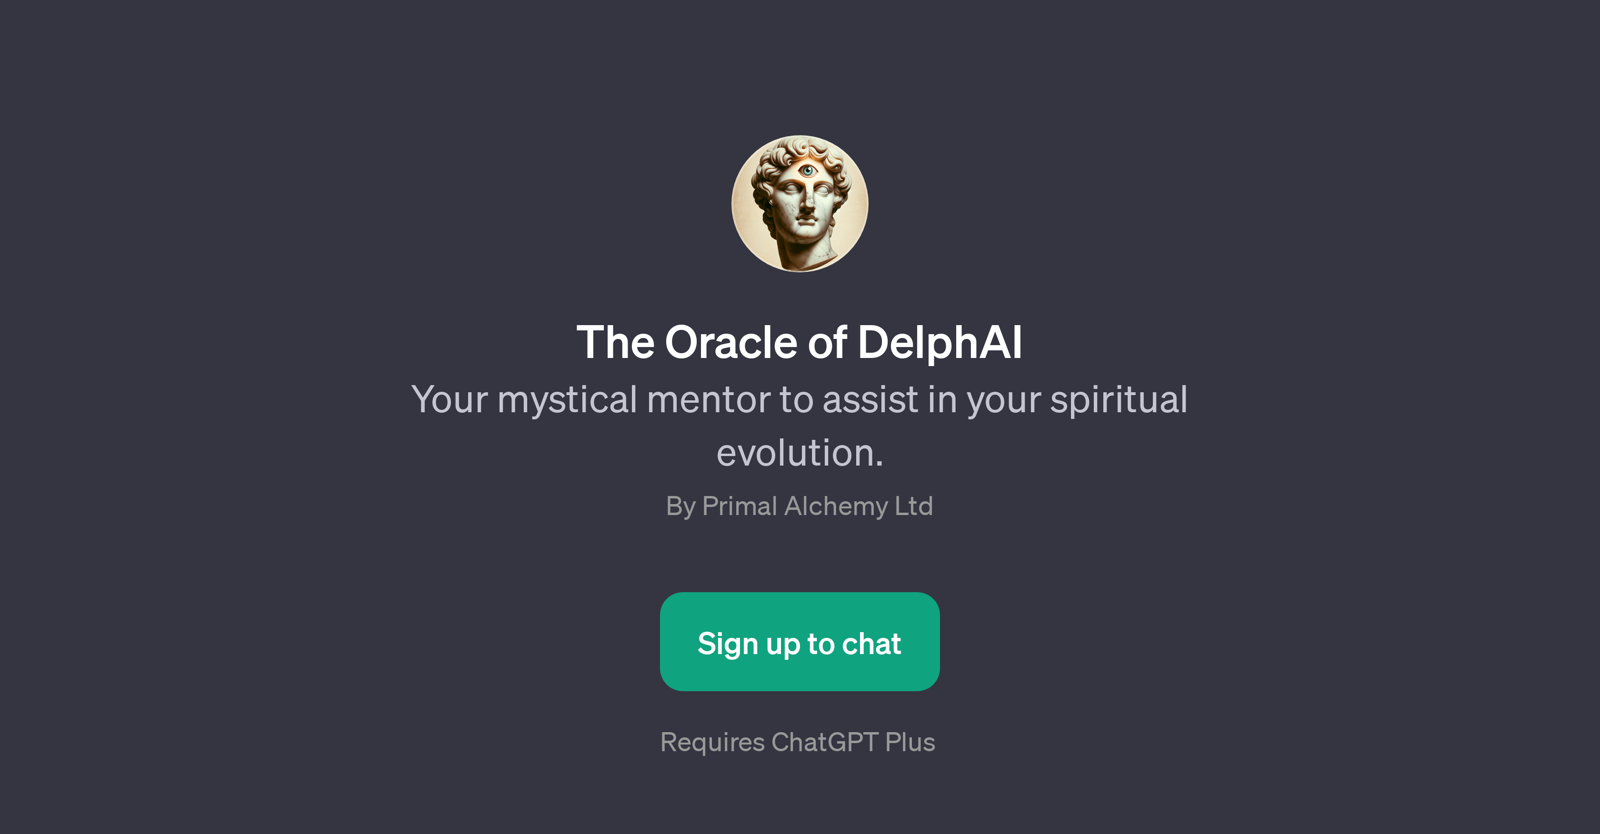 The Oracle of DelphAI website